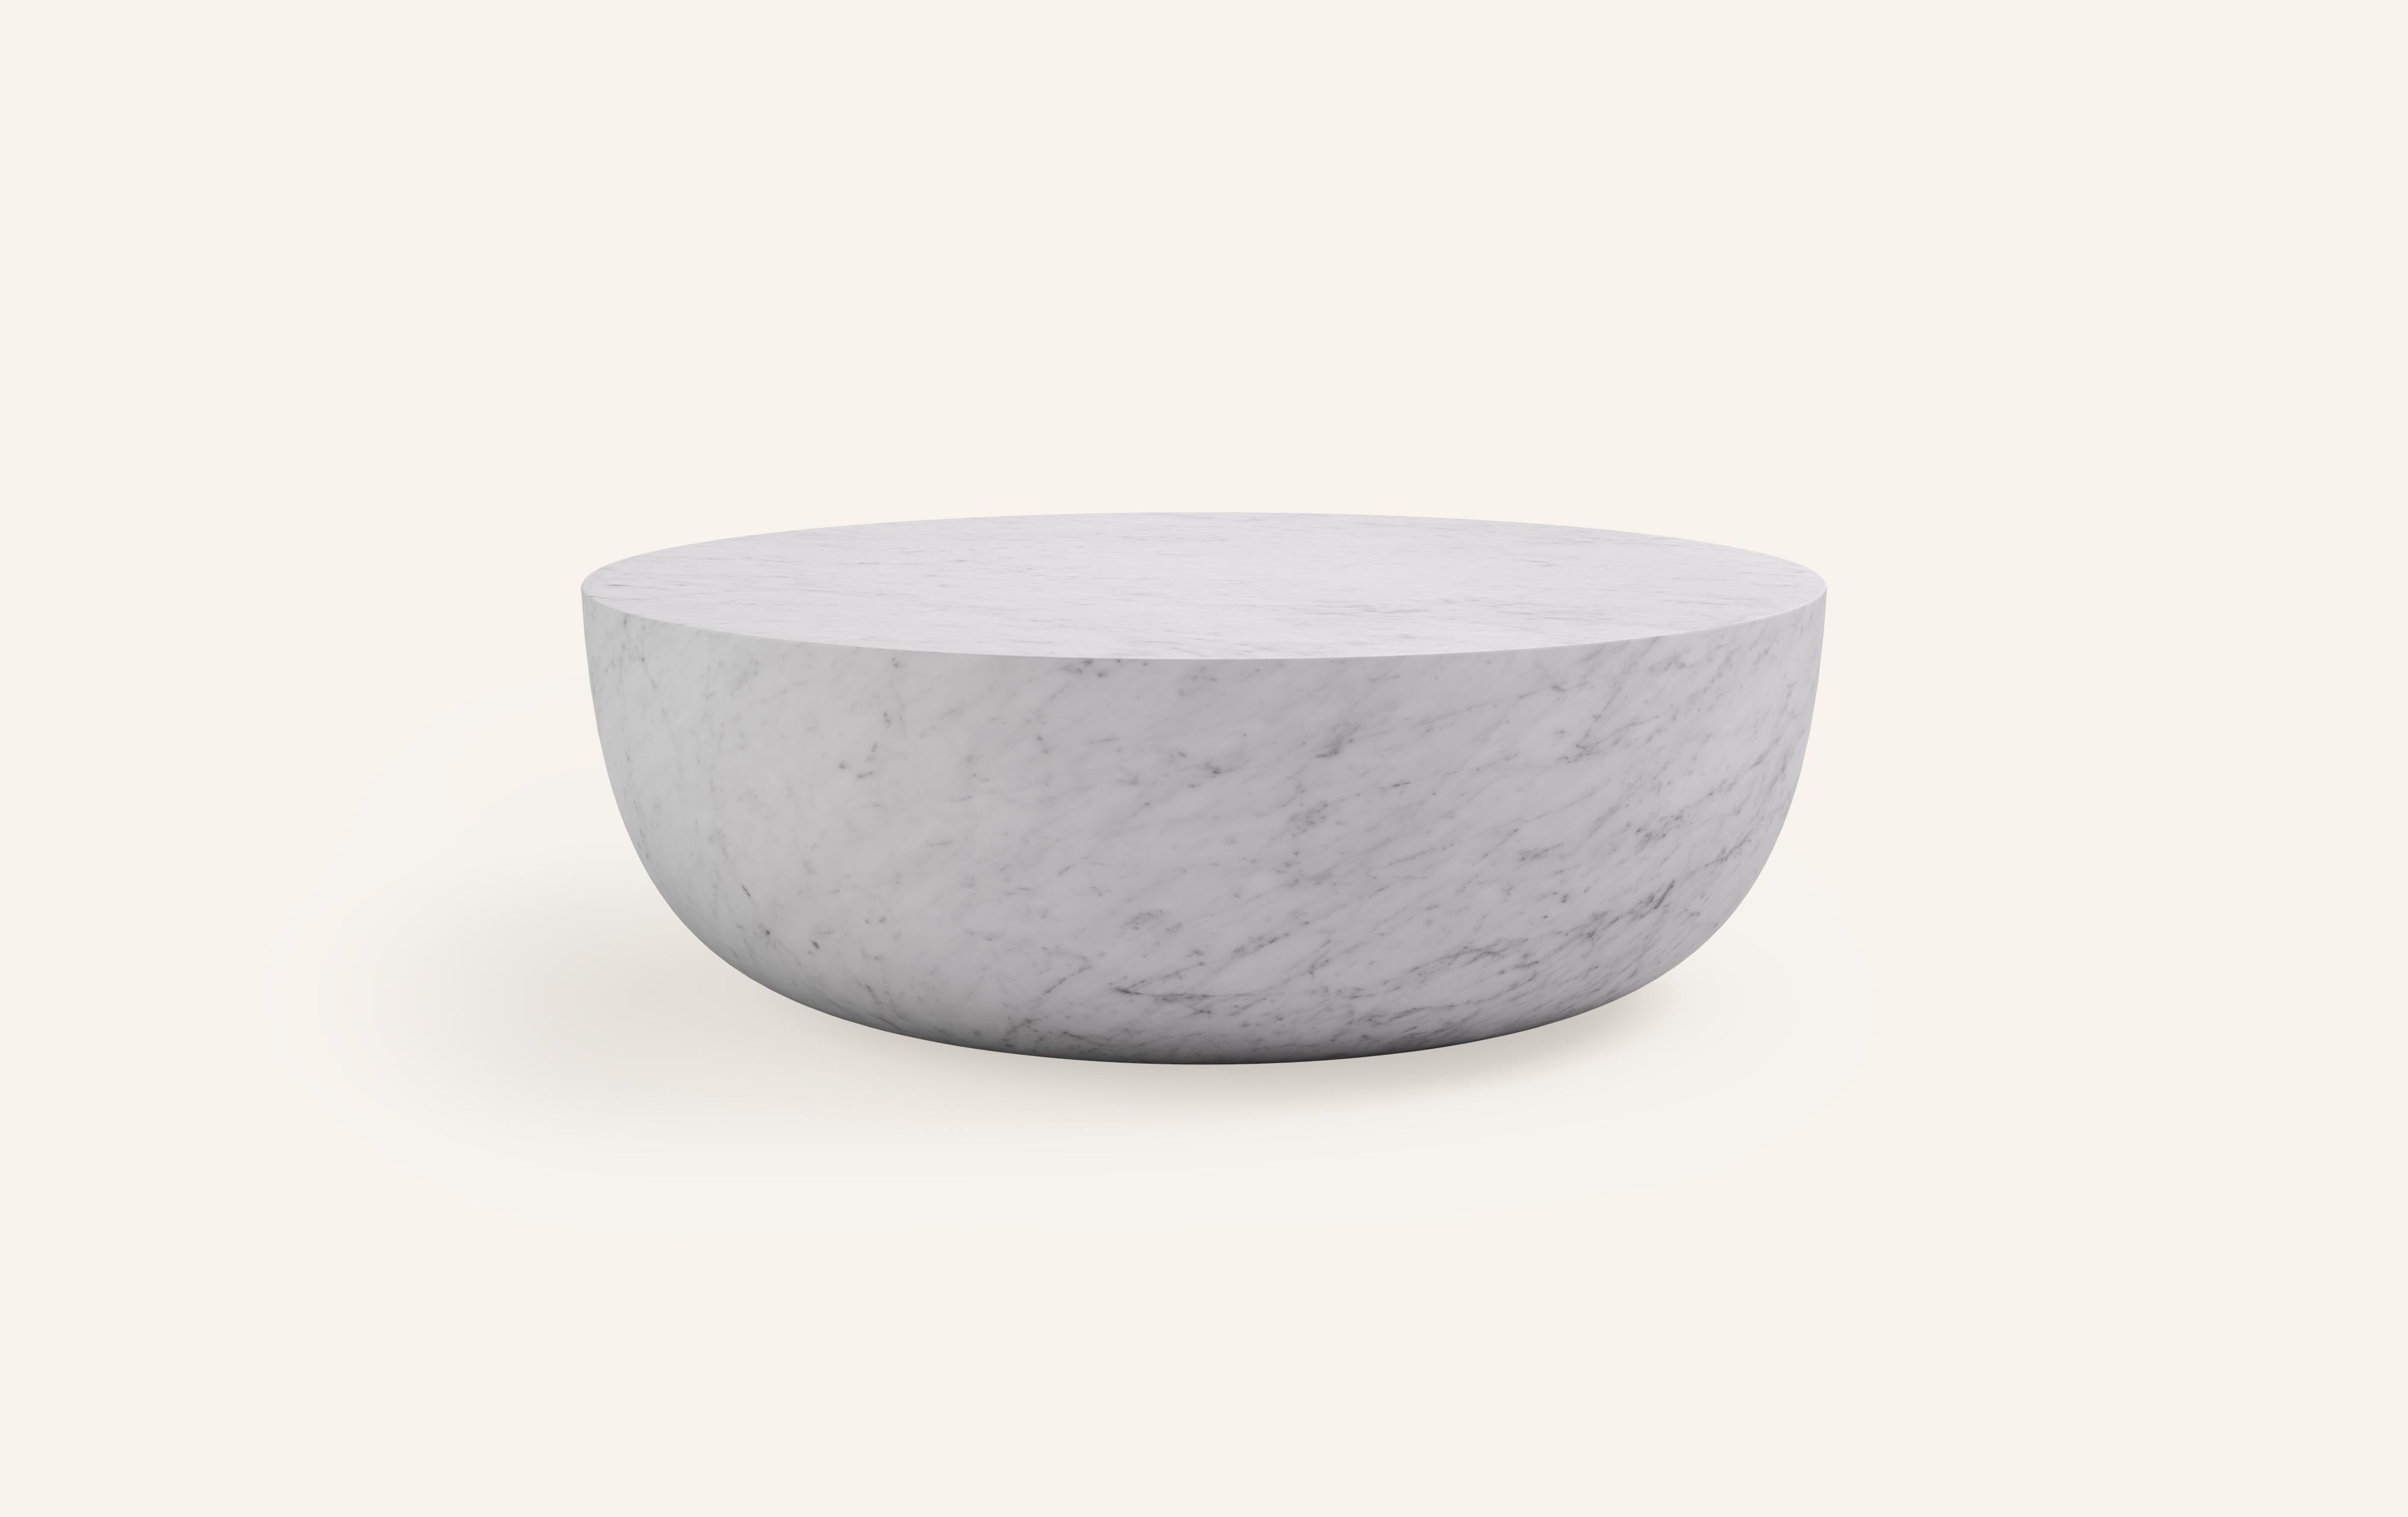 A SLICE OF A ’SPHERE’ OR 'SFERA' IN ITALIAN BALANCES A FLAT SURFACE ATOP AND ROBUST MONOLITH FORM. WITH A BASE SOFTENED BY A CURVED PROFILE, SFERA IS SOFT AND EARTHY IN ITS AVAILABLE STONE SELECTIONS.

DIMENSIONS: 
48”L x 48”W x 16”H: 
- SOLID